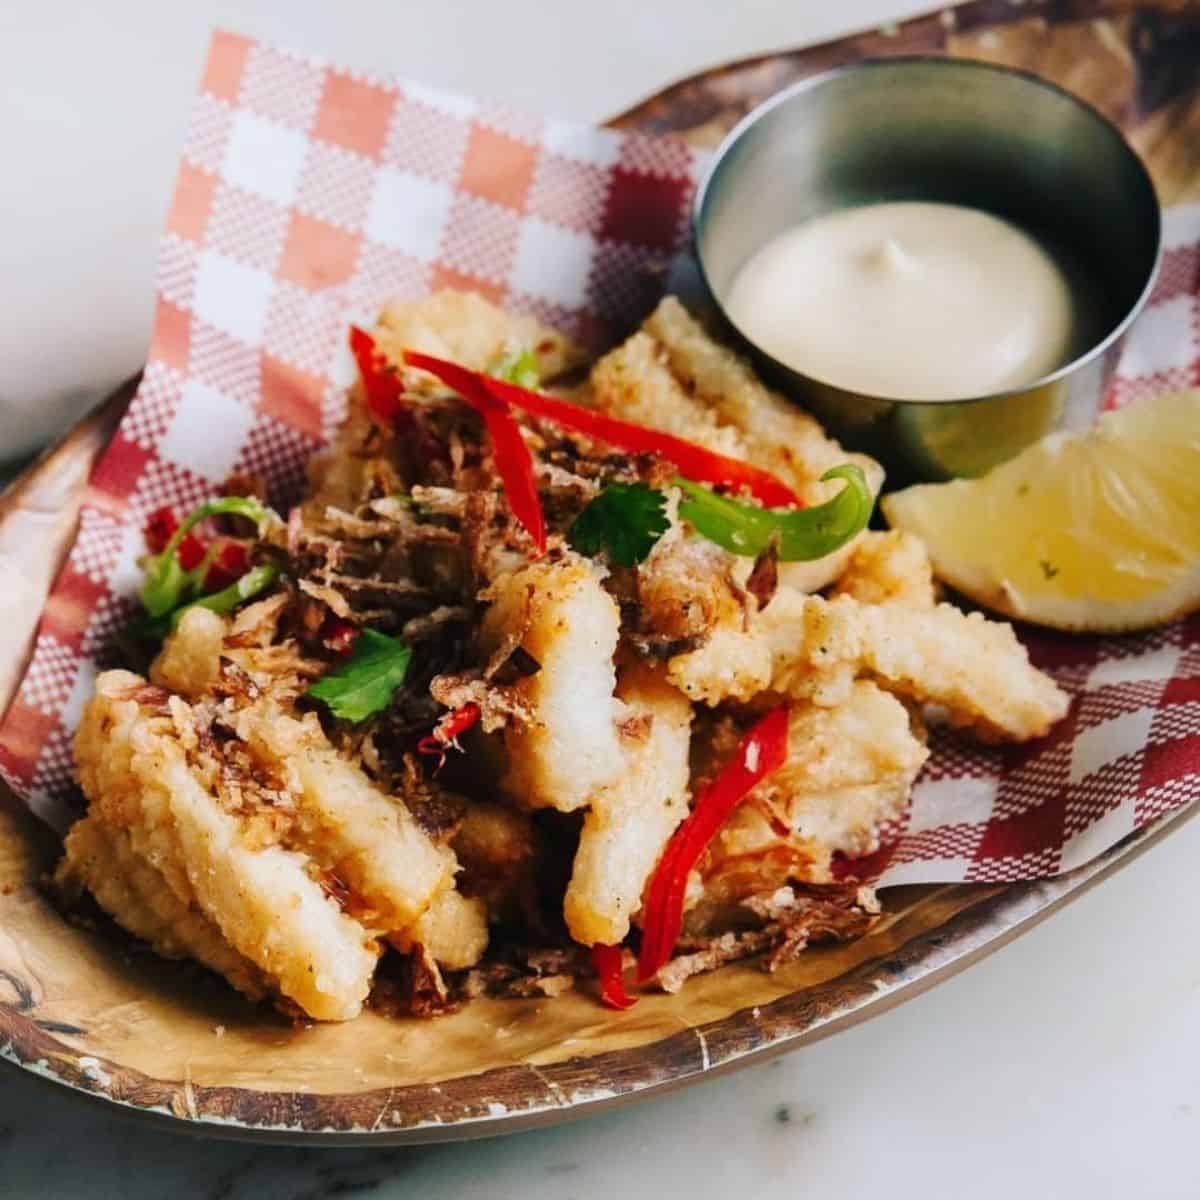 Chinese Salt And Pepper Squid Recipe In 3 Ways!